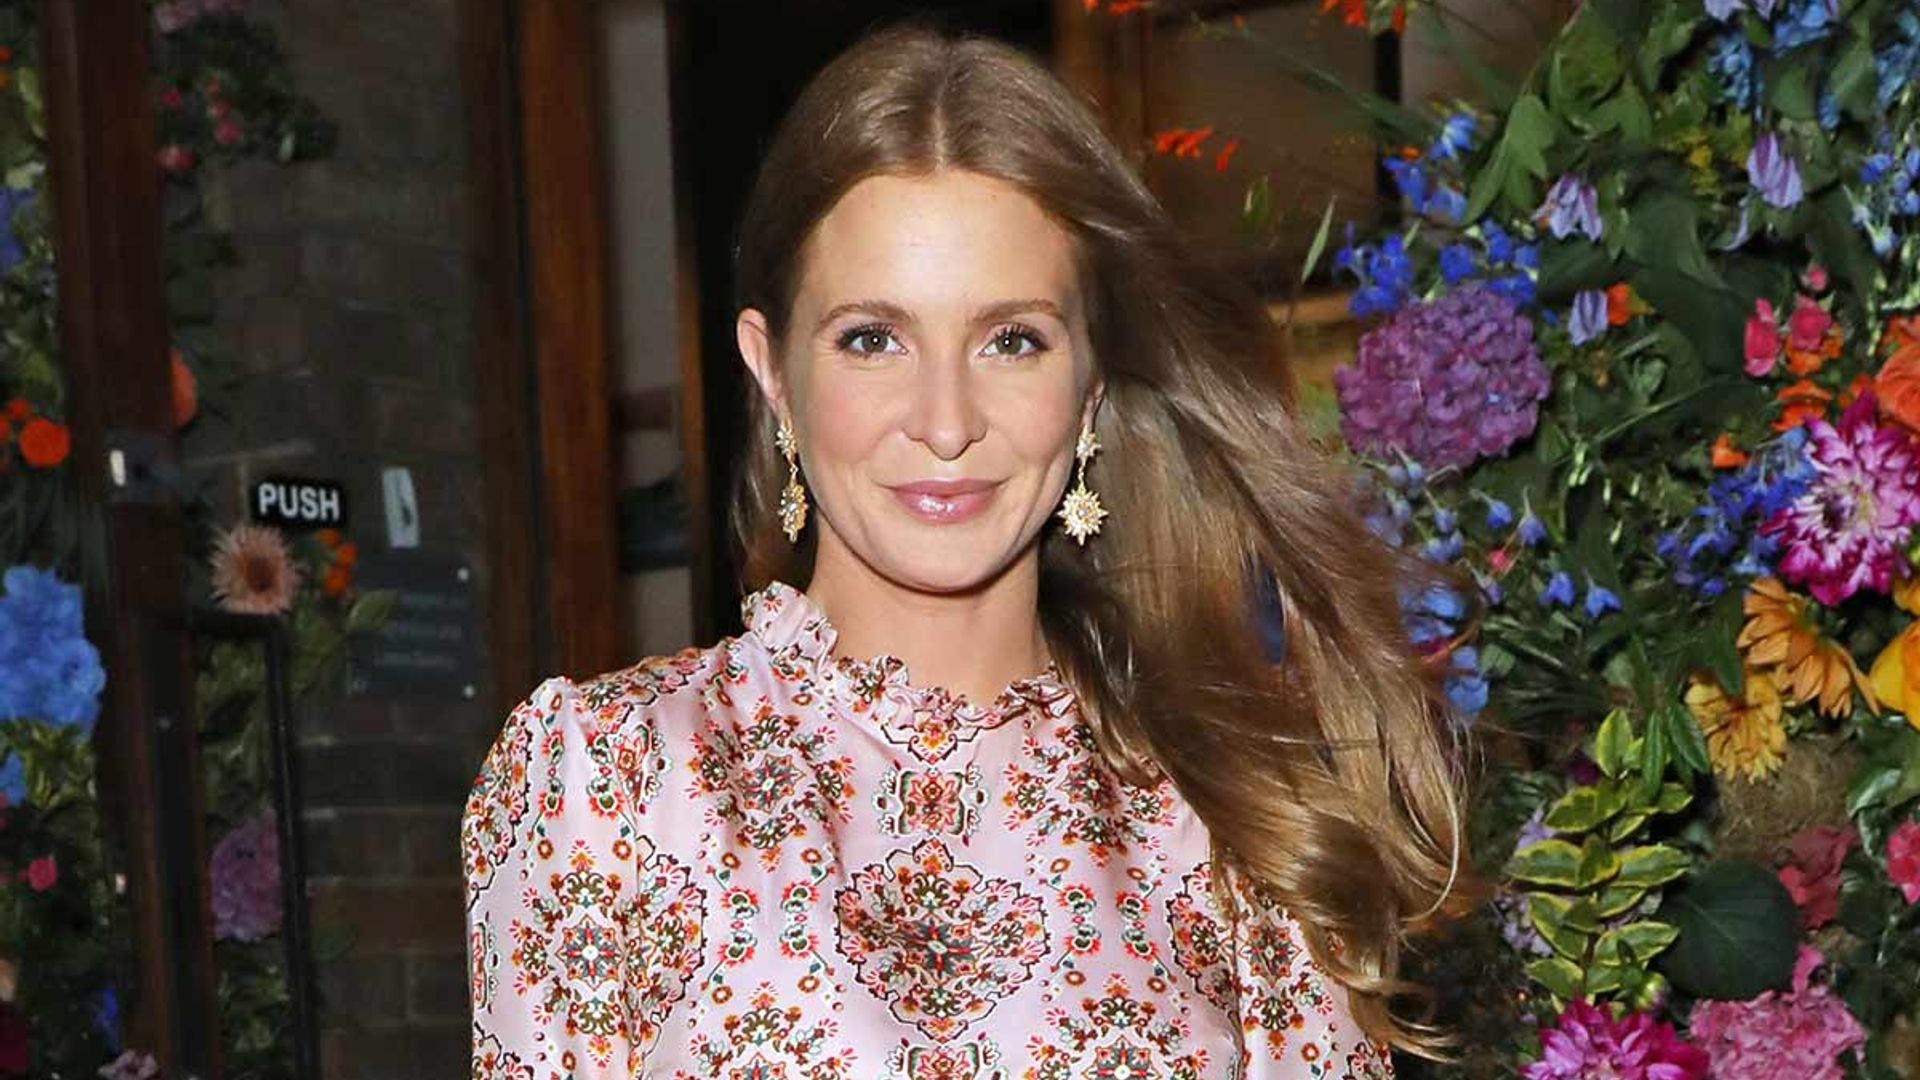 Millie Mackintosh looks stunning as she steps out in one of Kate Middleton’s favourite affordable brands